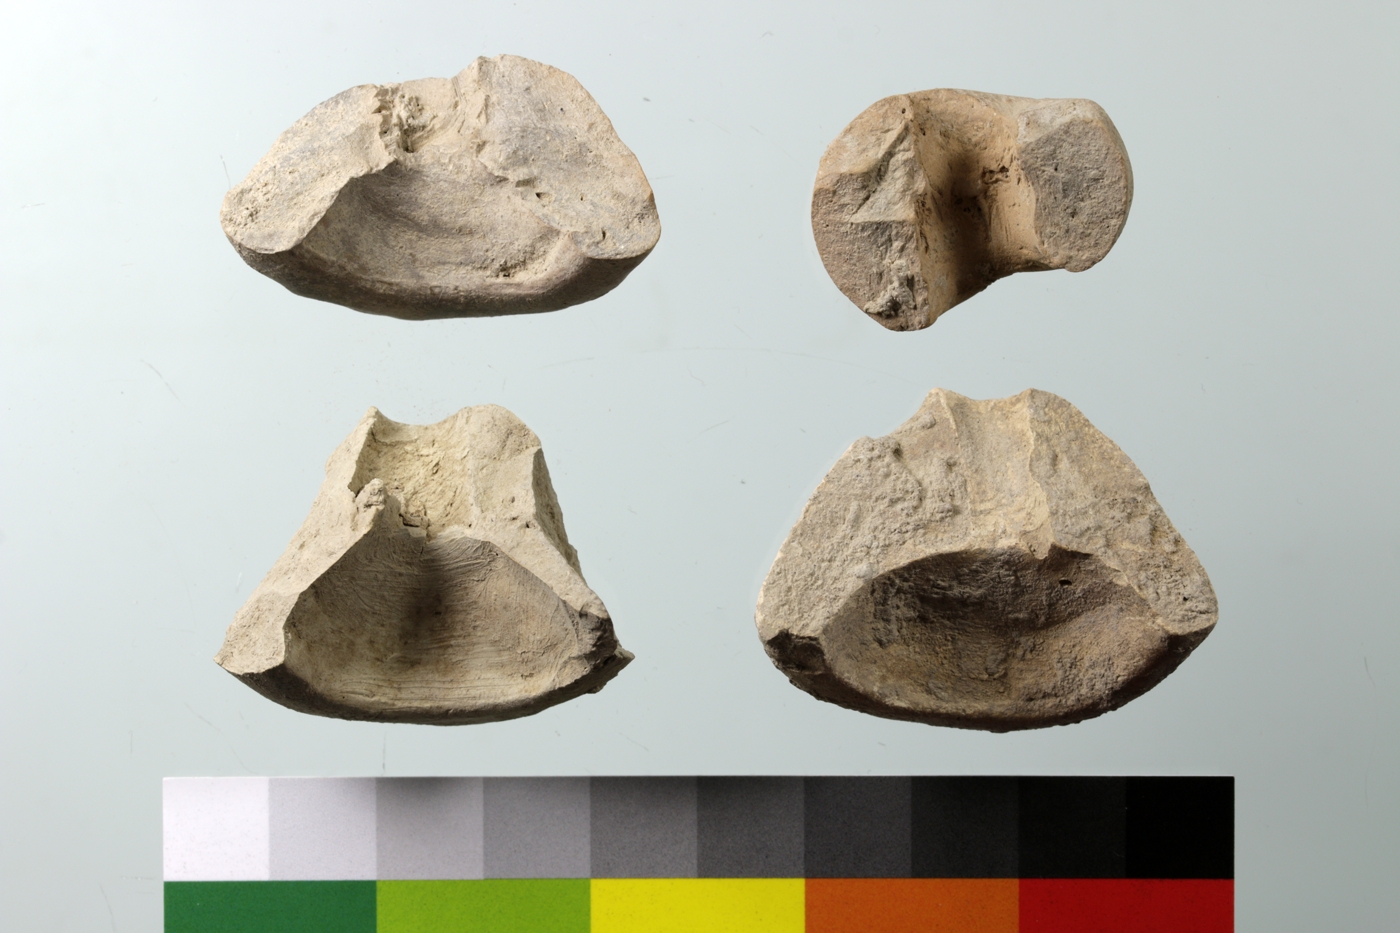 Funnel-shaped spindle whorls (left and lower right) and one conical spindle whorl (upper right) in cross-section